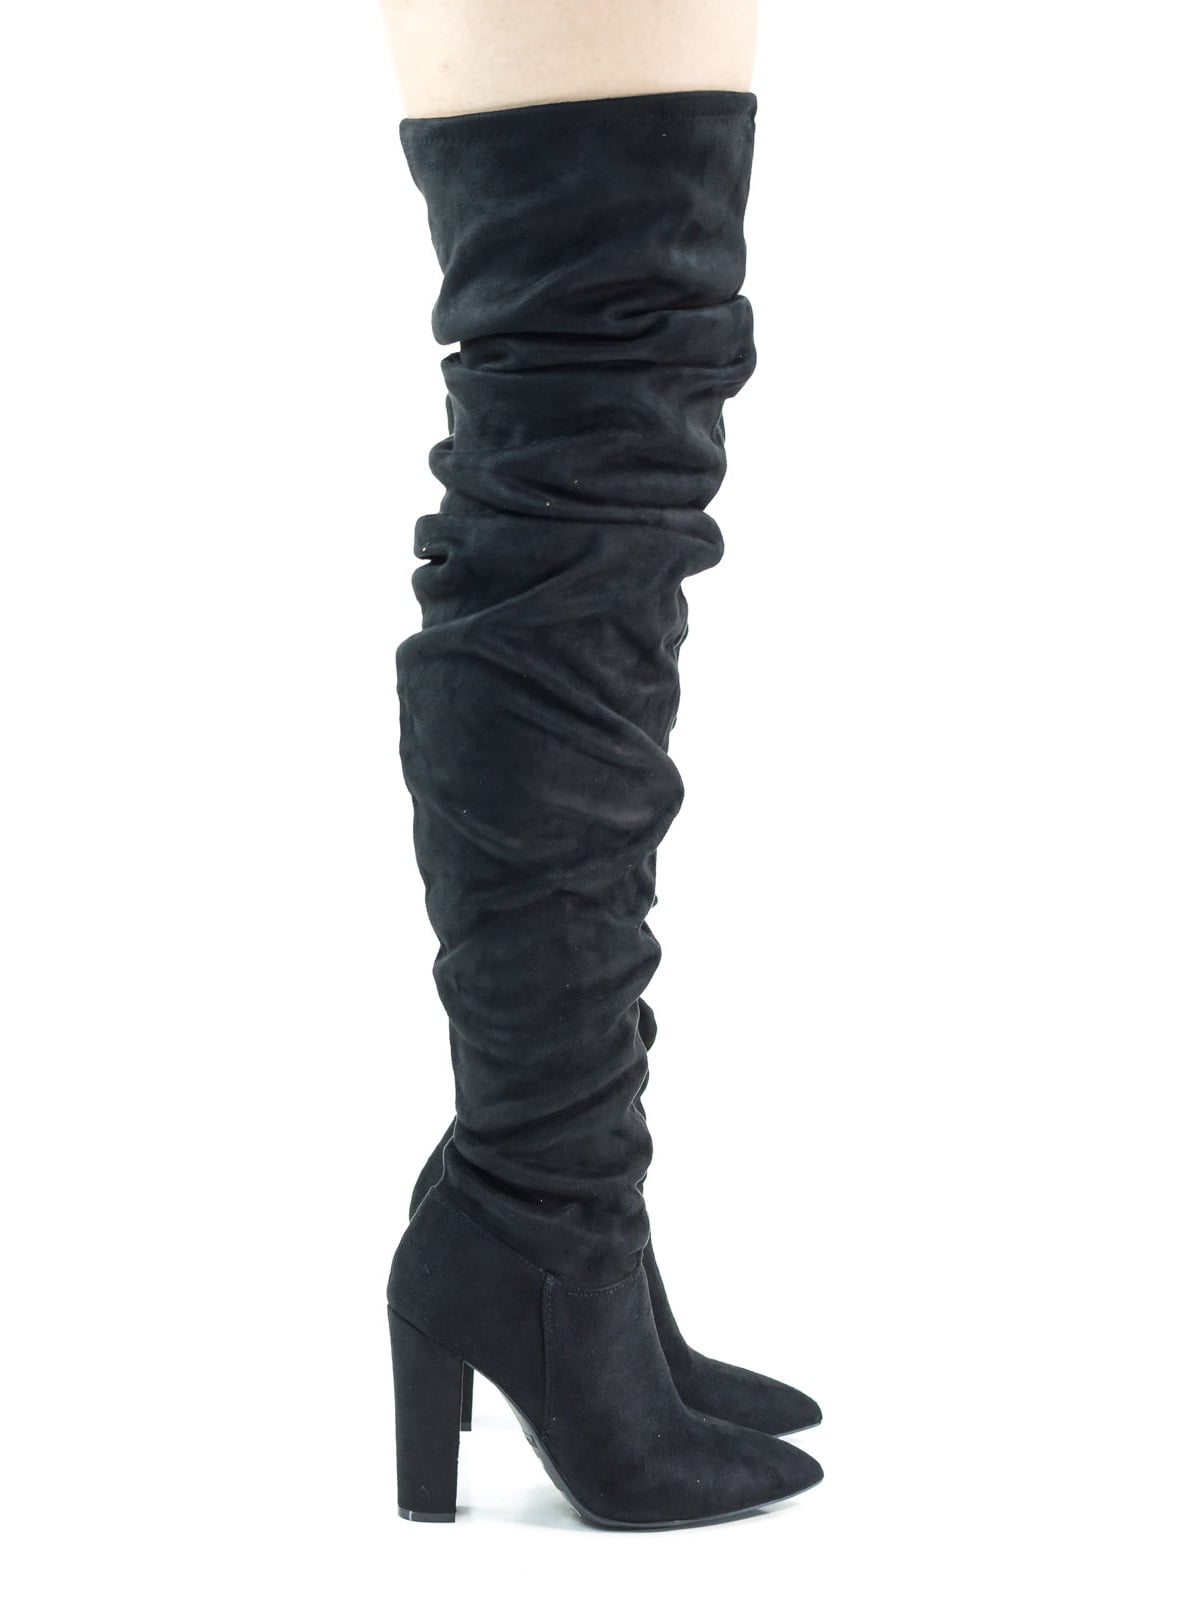 Madam18 by Bamboo, Over Knee Thigh High 